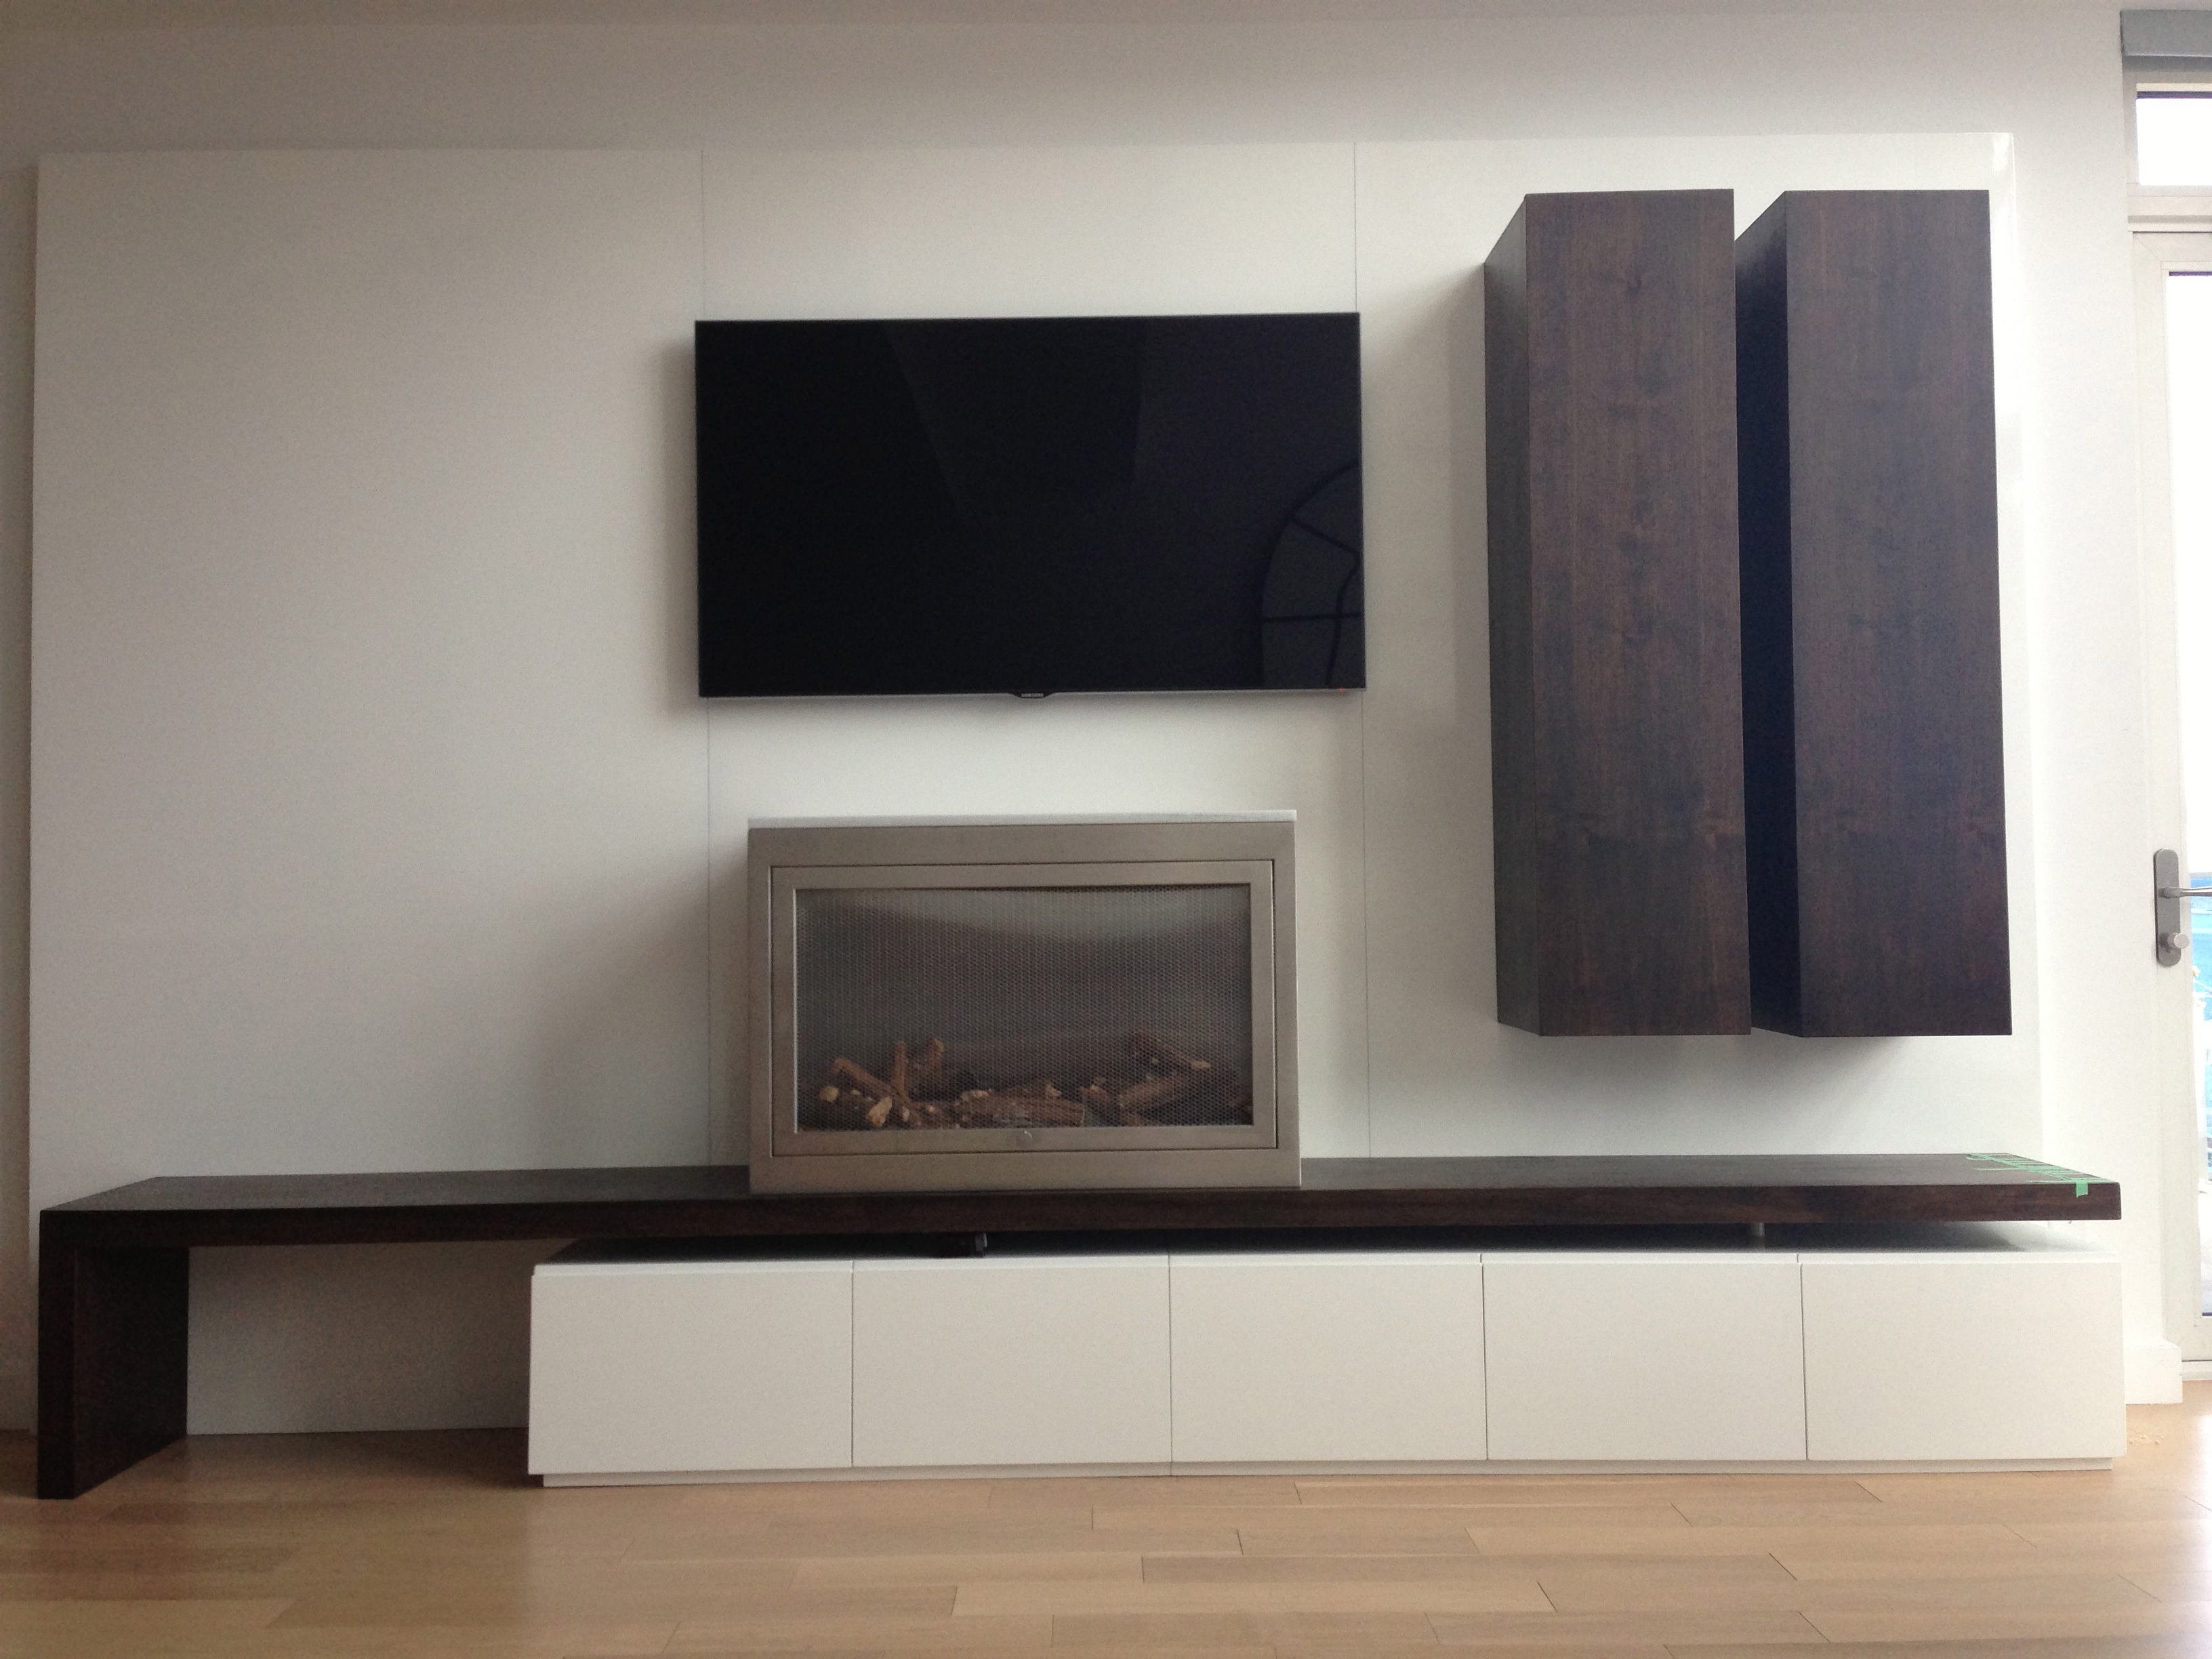 Minimalist Media Unit for a Collector. « The Perfect Black